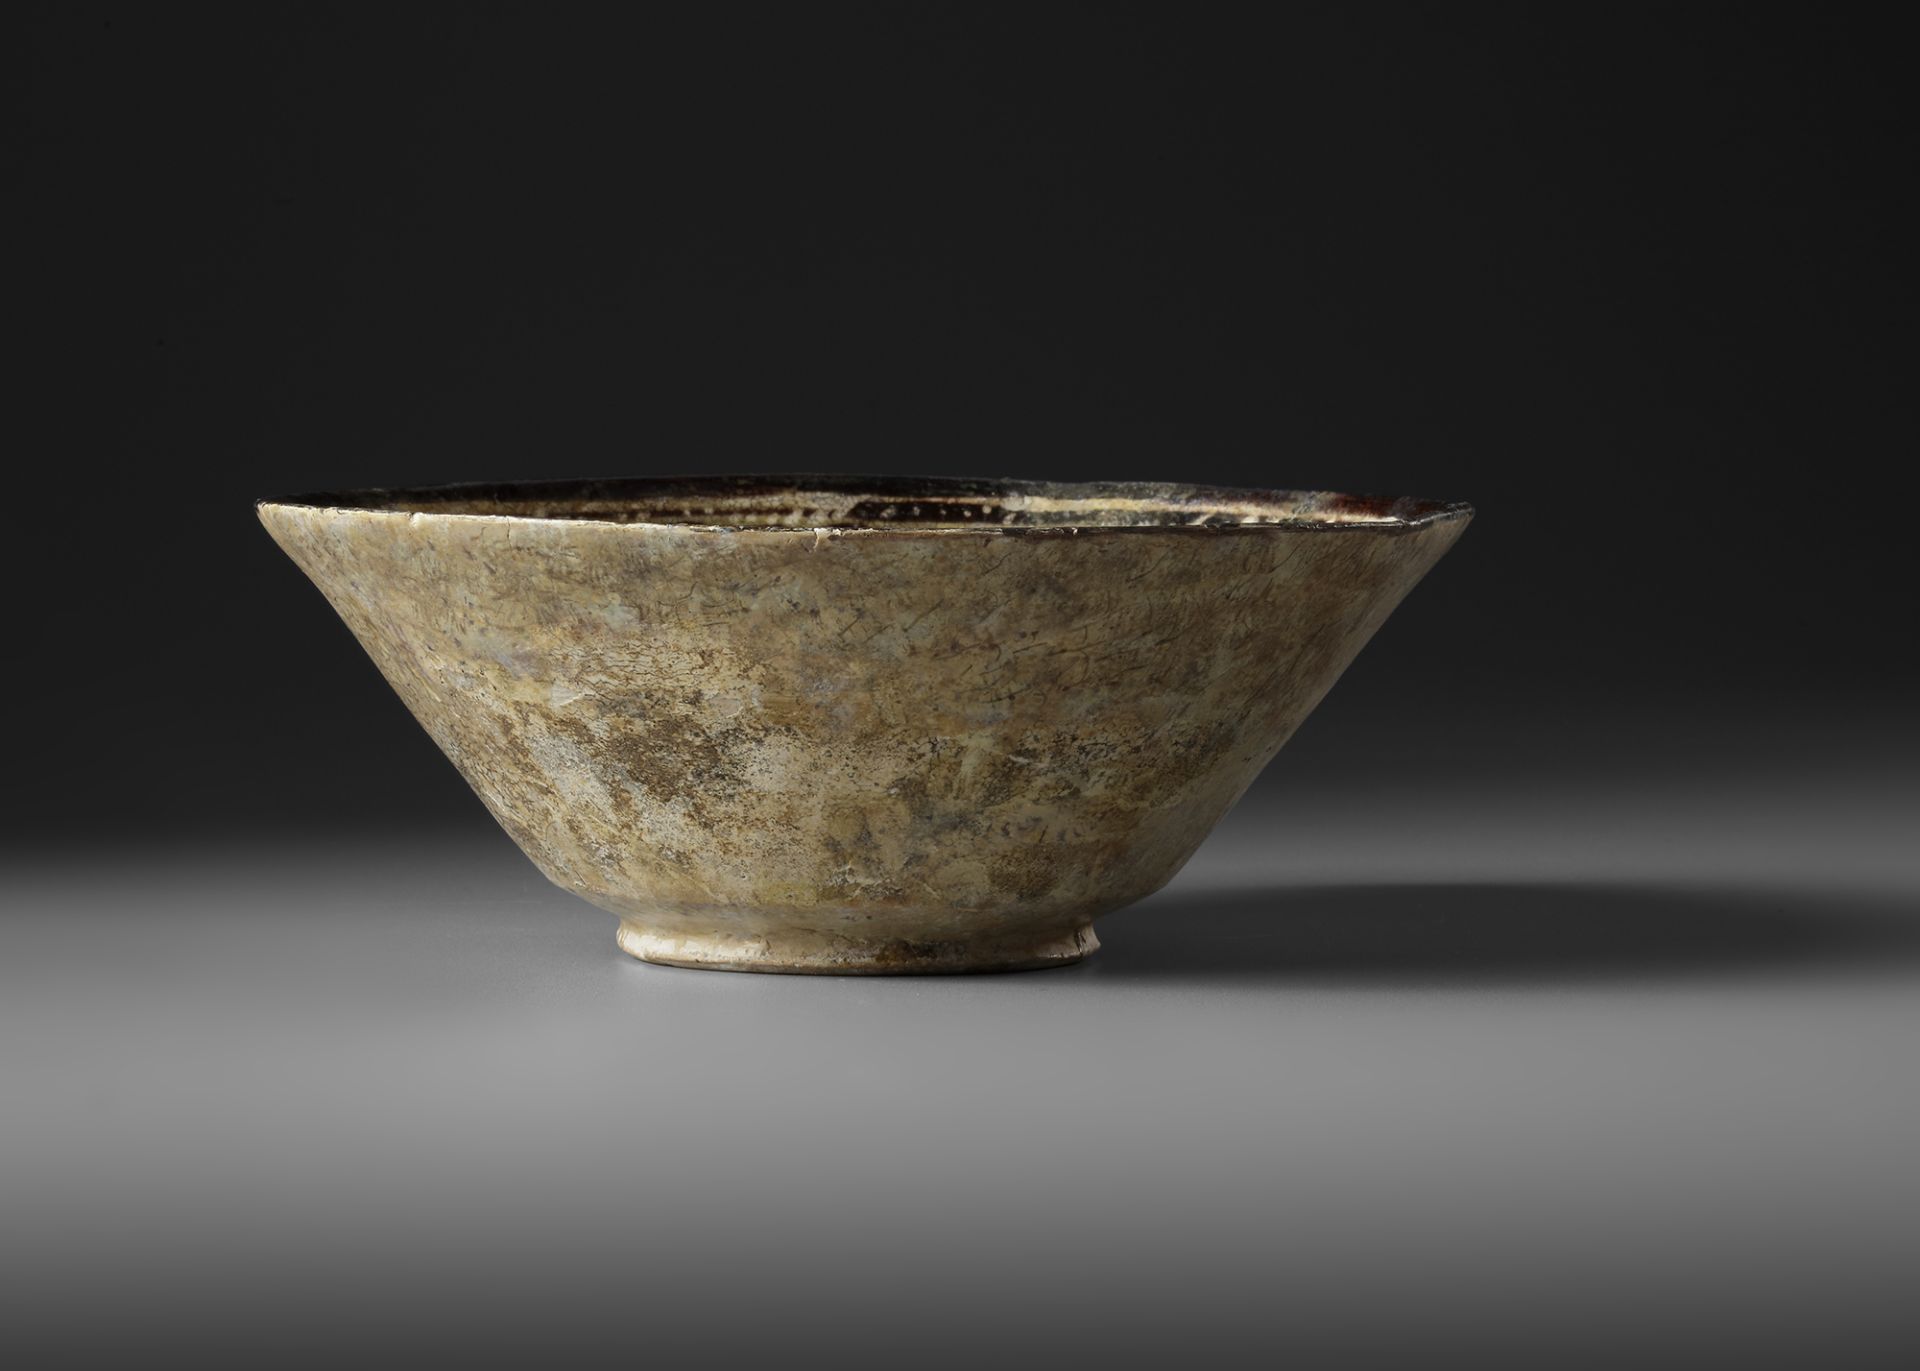 A NISHAPUR CONICAL POTTERY BOWL, PERSIA, LATE 9TH-EARLY 10TH CENTURY - Image 2 of 4